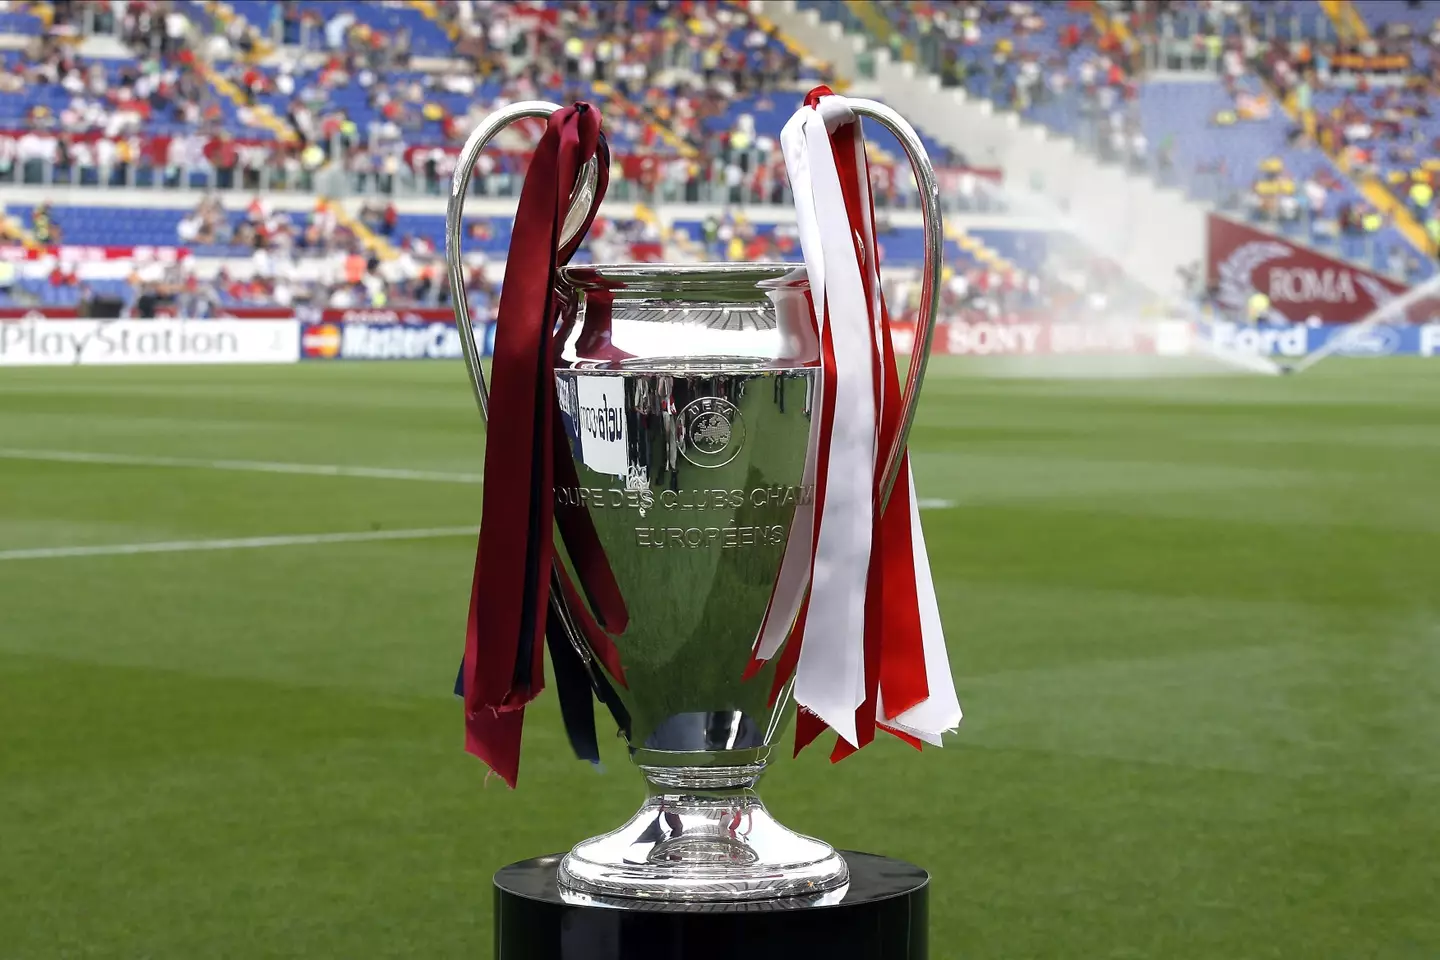 The Champions League Cup